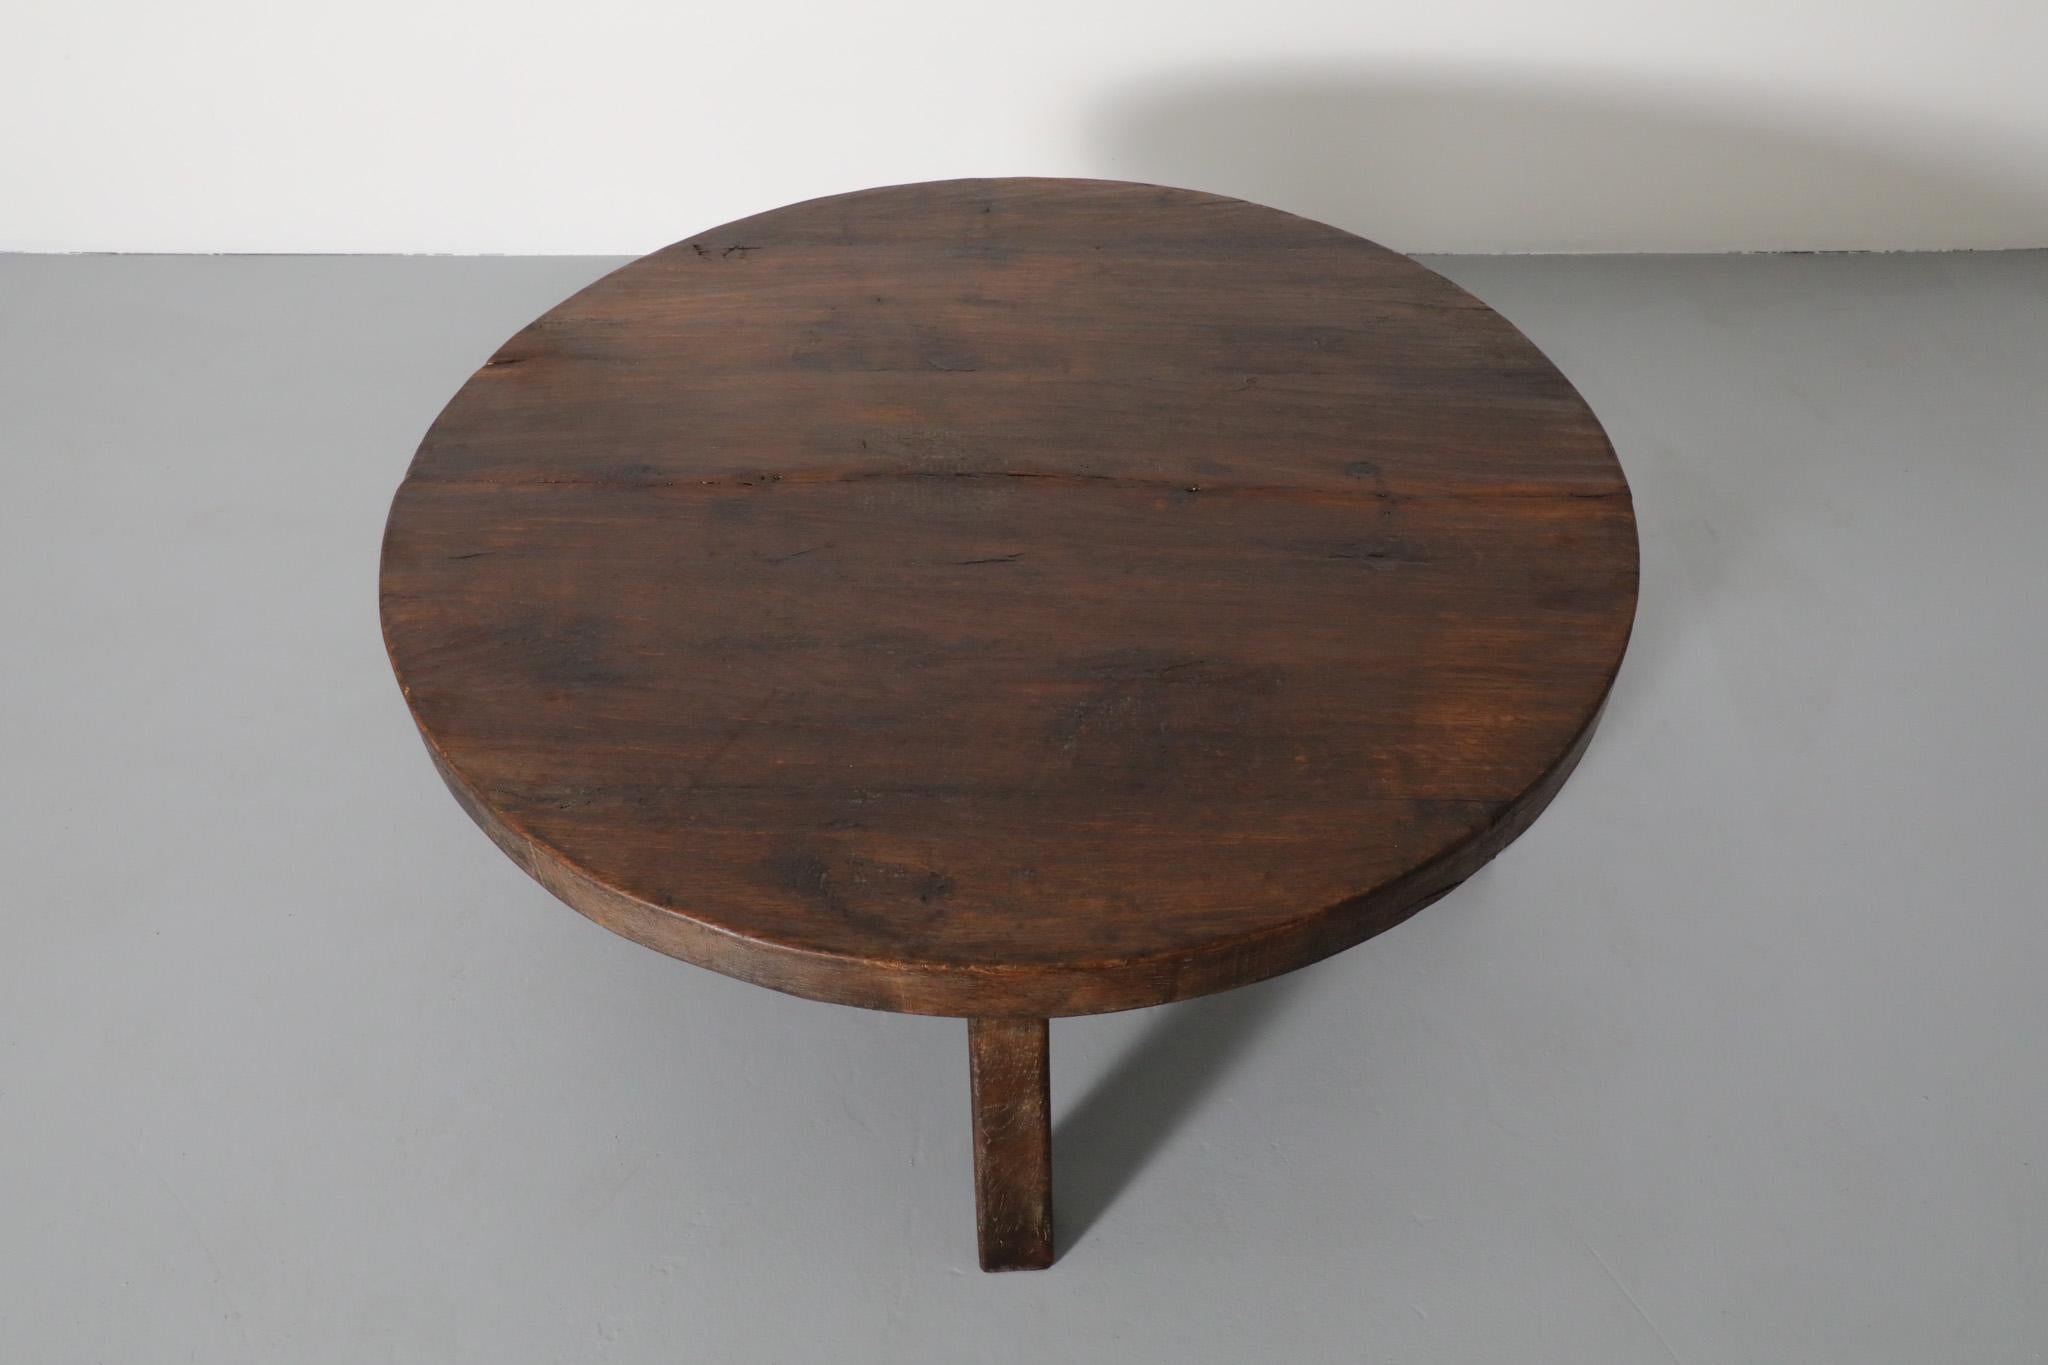 Pierre Chapo Style Brutalist Oak Coffee Table with Curved Legs 2